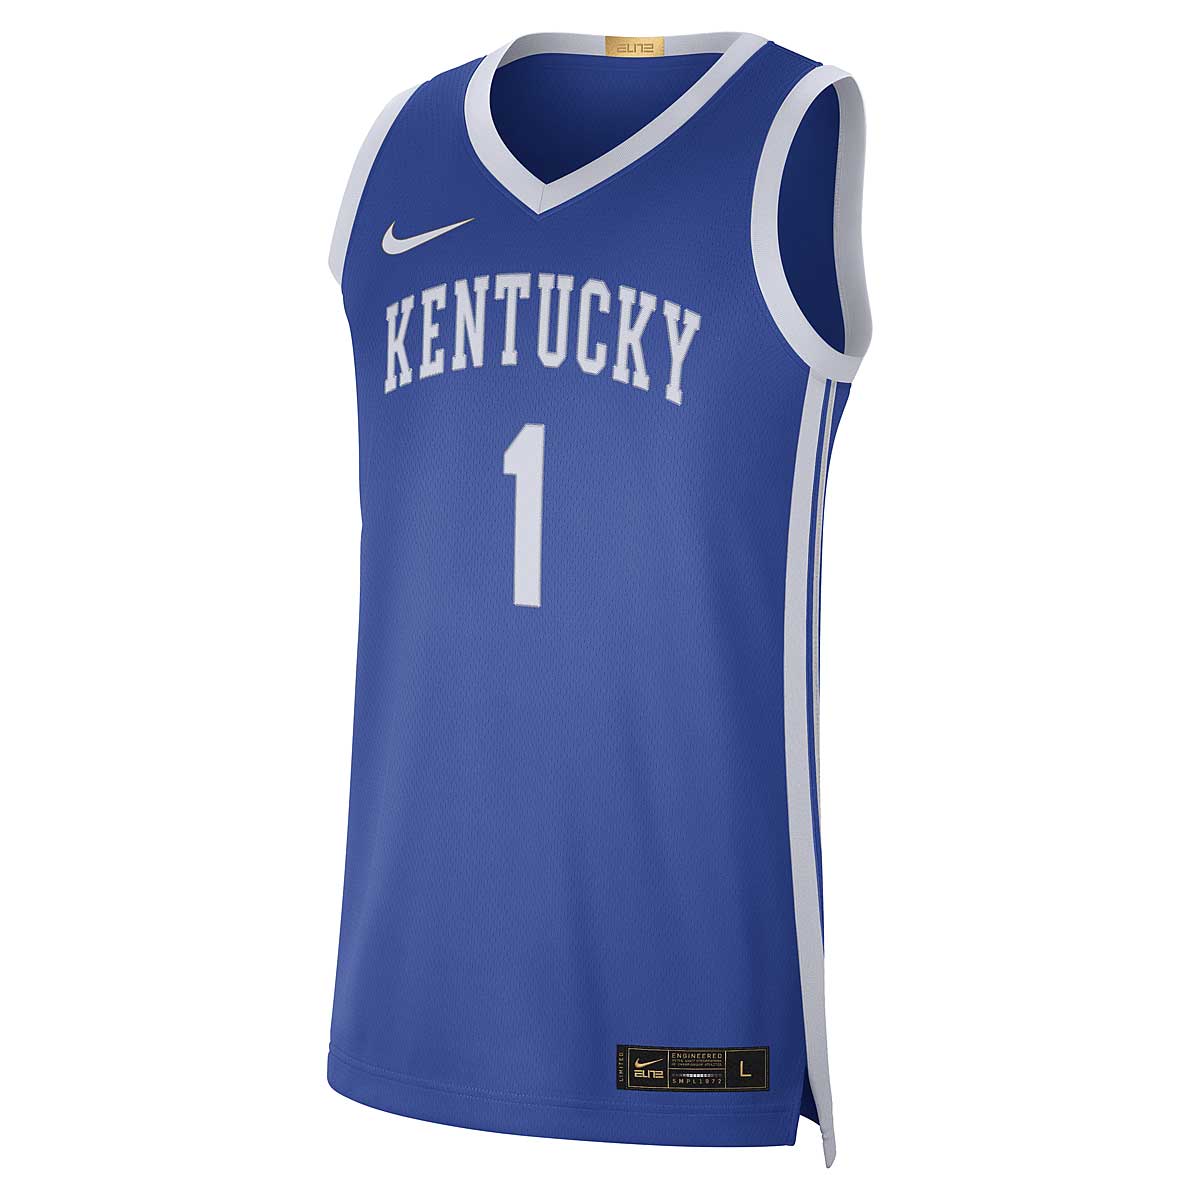 Nike Ncaa Kentucky Wildcats Dri-fit Limited Edition Jersey Devin Booker, Game Royal L